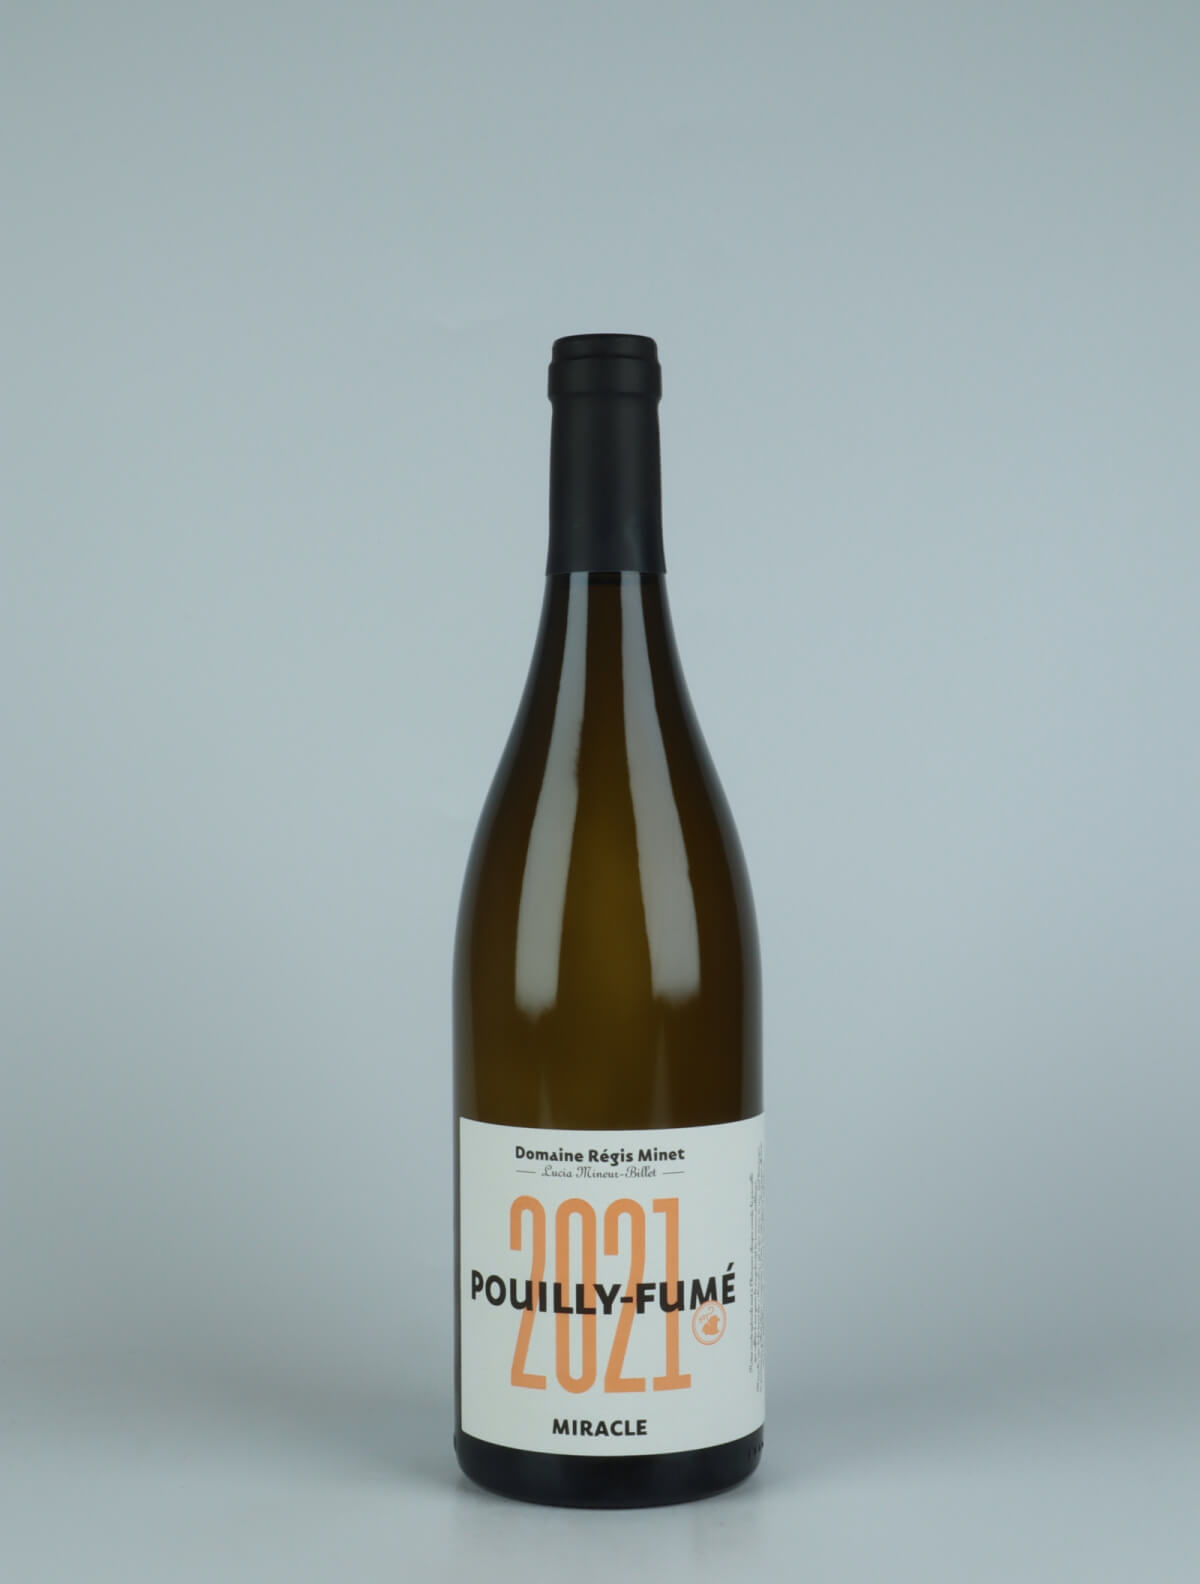 A bottle 2021 Pouilly Fumé - Miracle White wine from Régis Minet, Loire in France